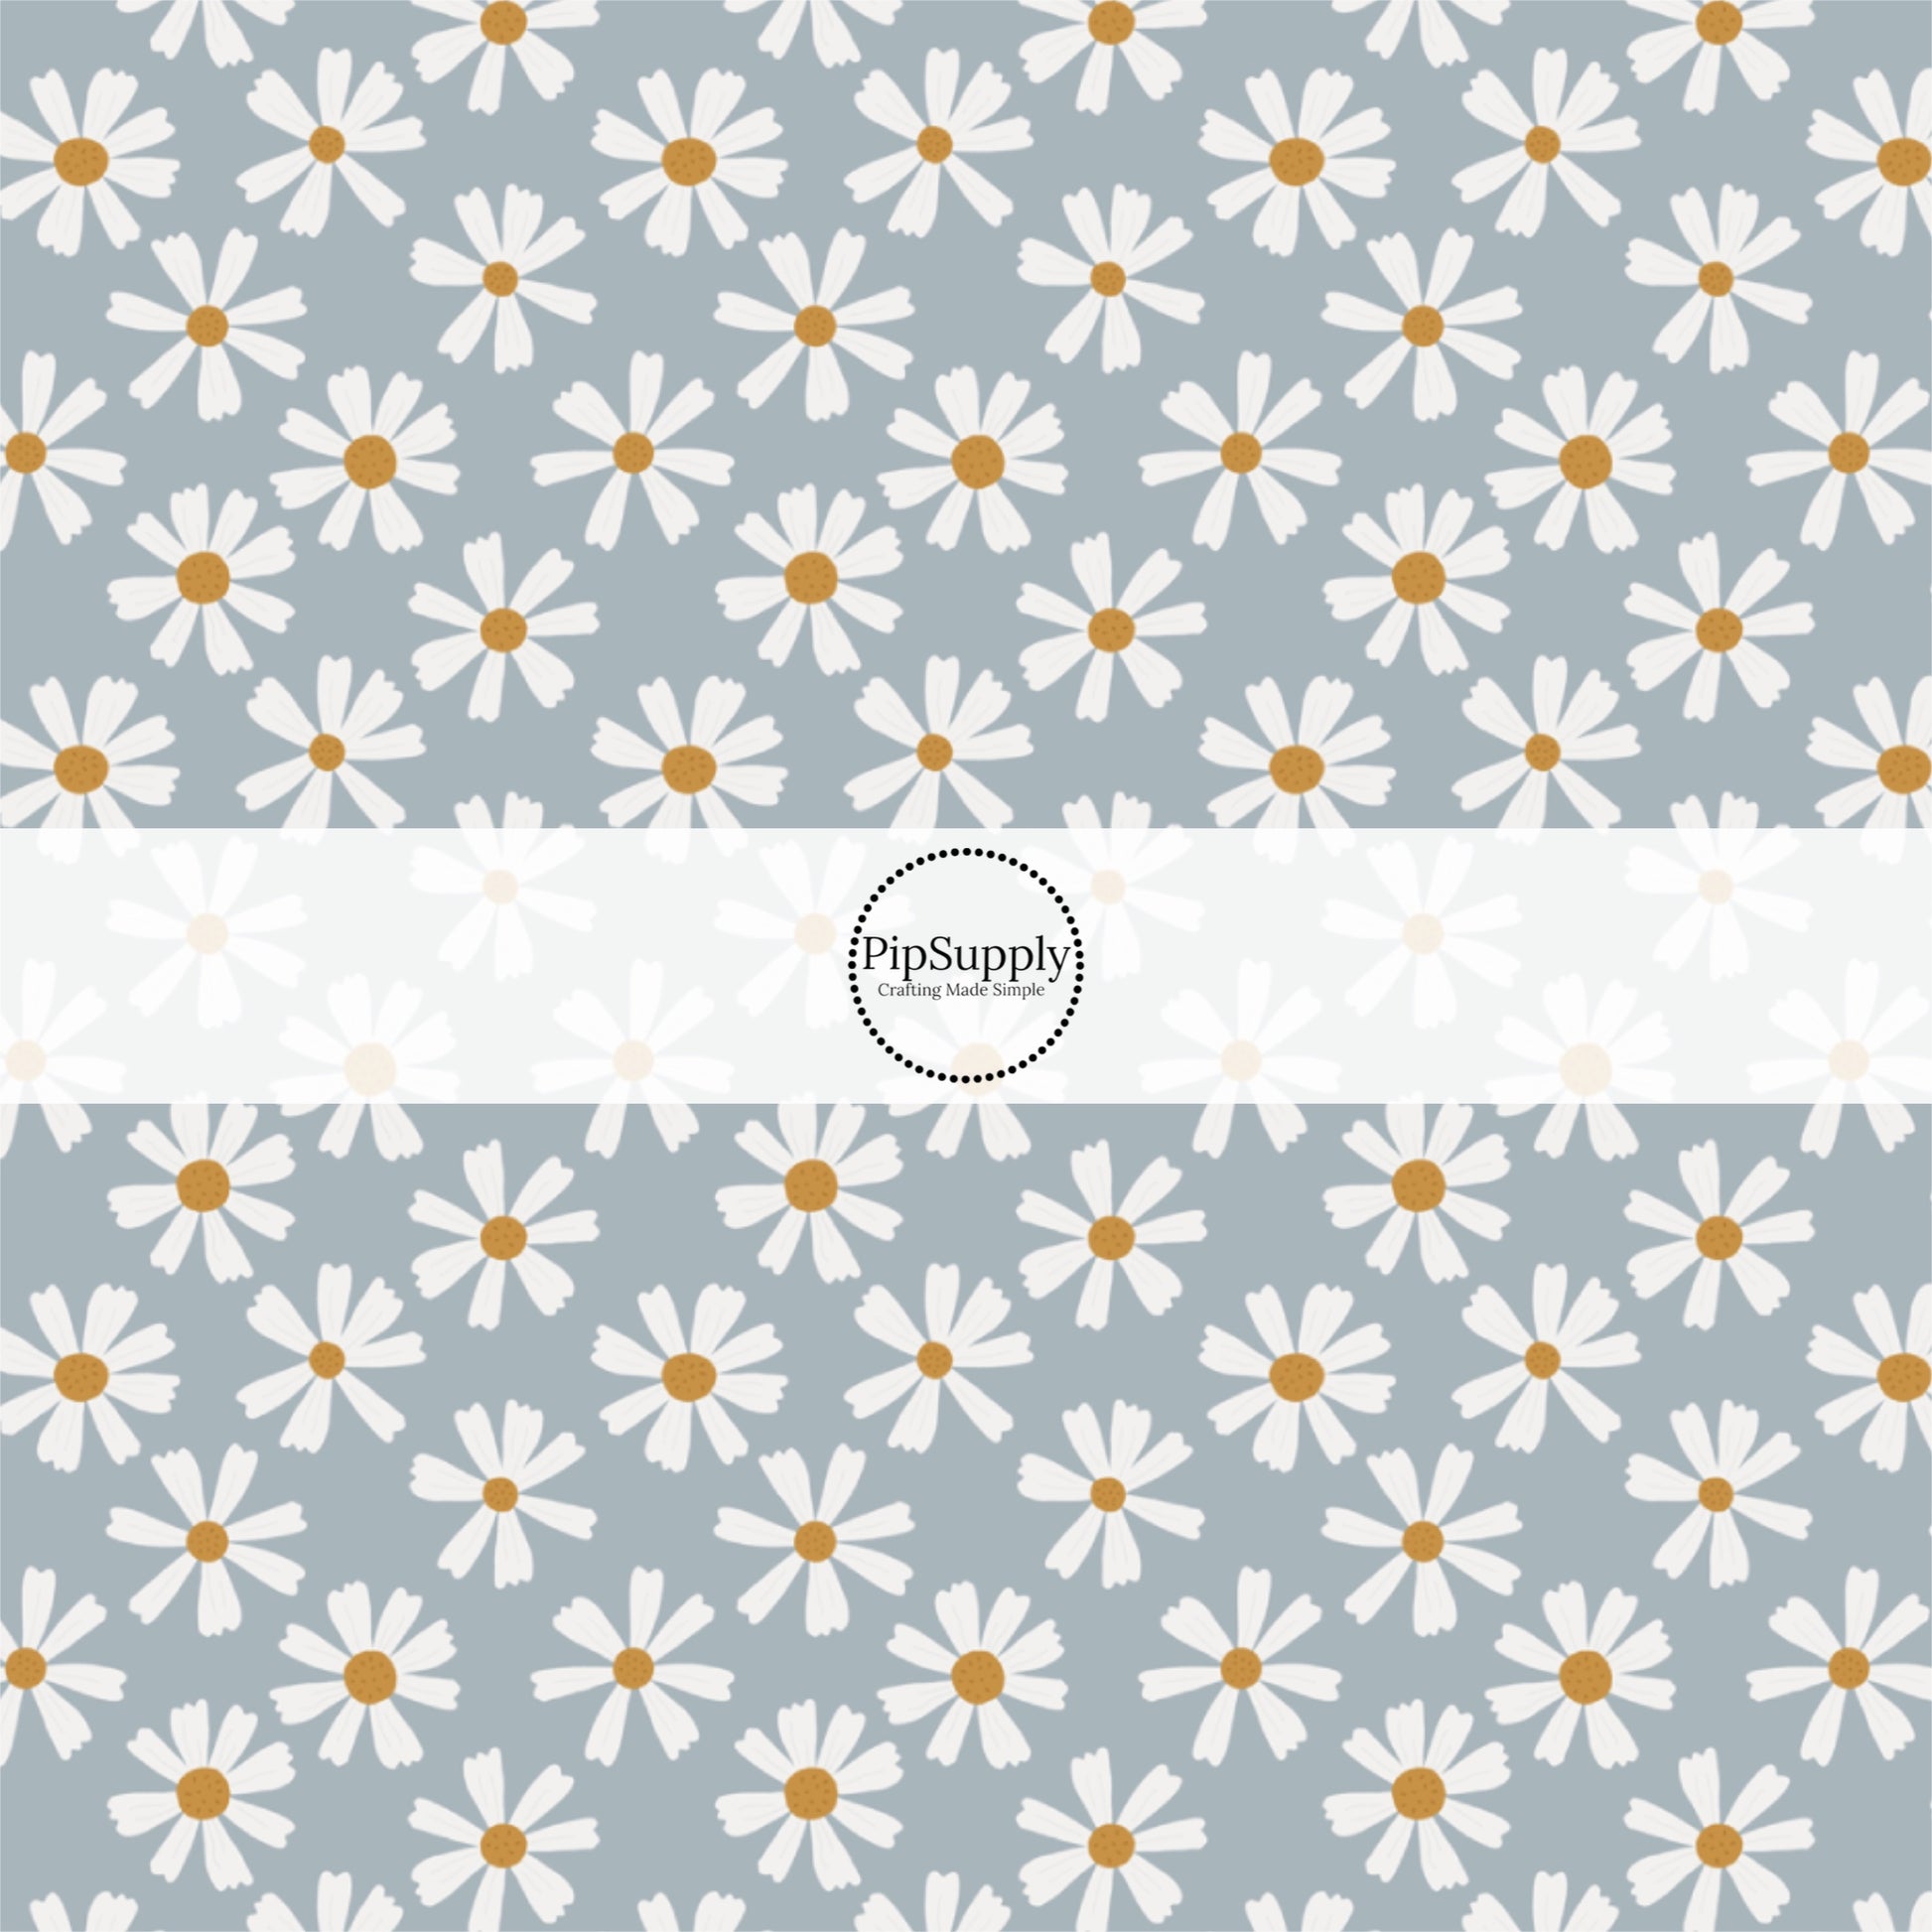 This summer fabric by the yard features white daisies on blue. This fun summer themed fabric can be used for all your sewing and crafting needs!